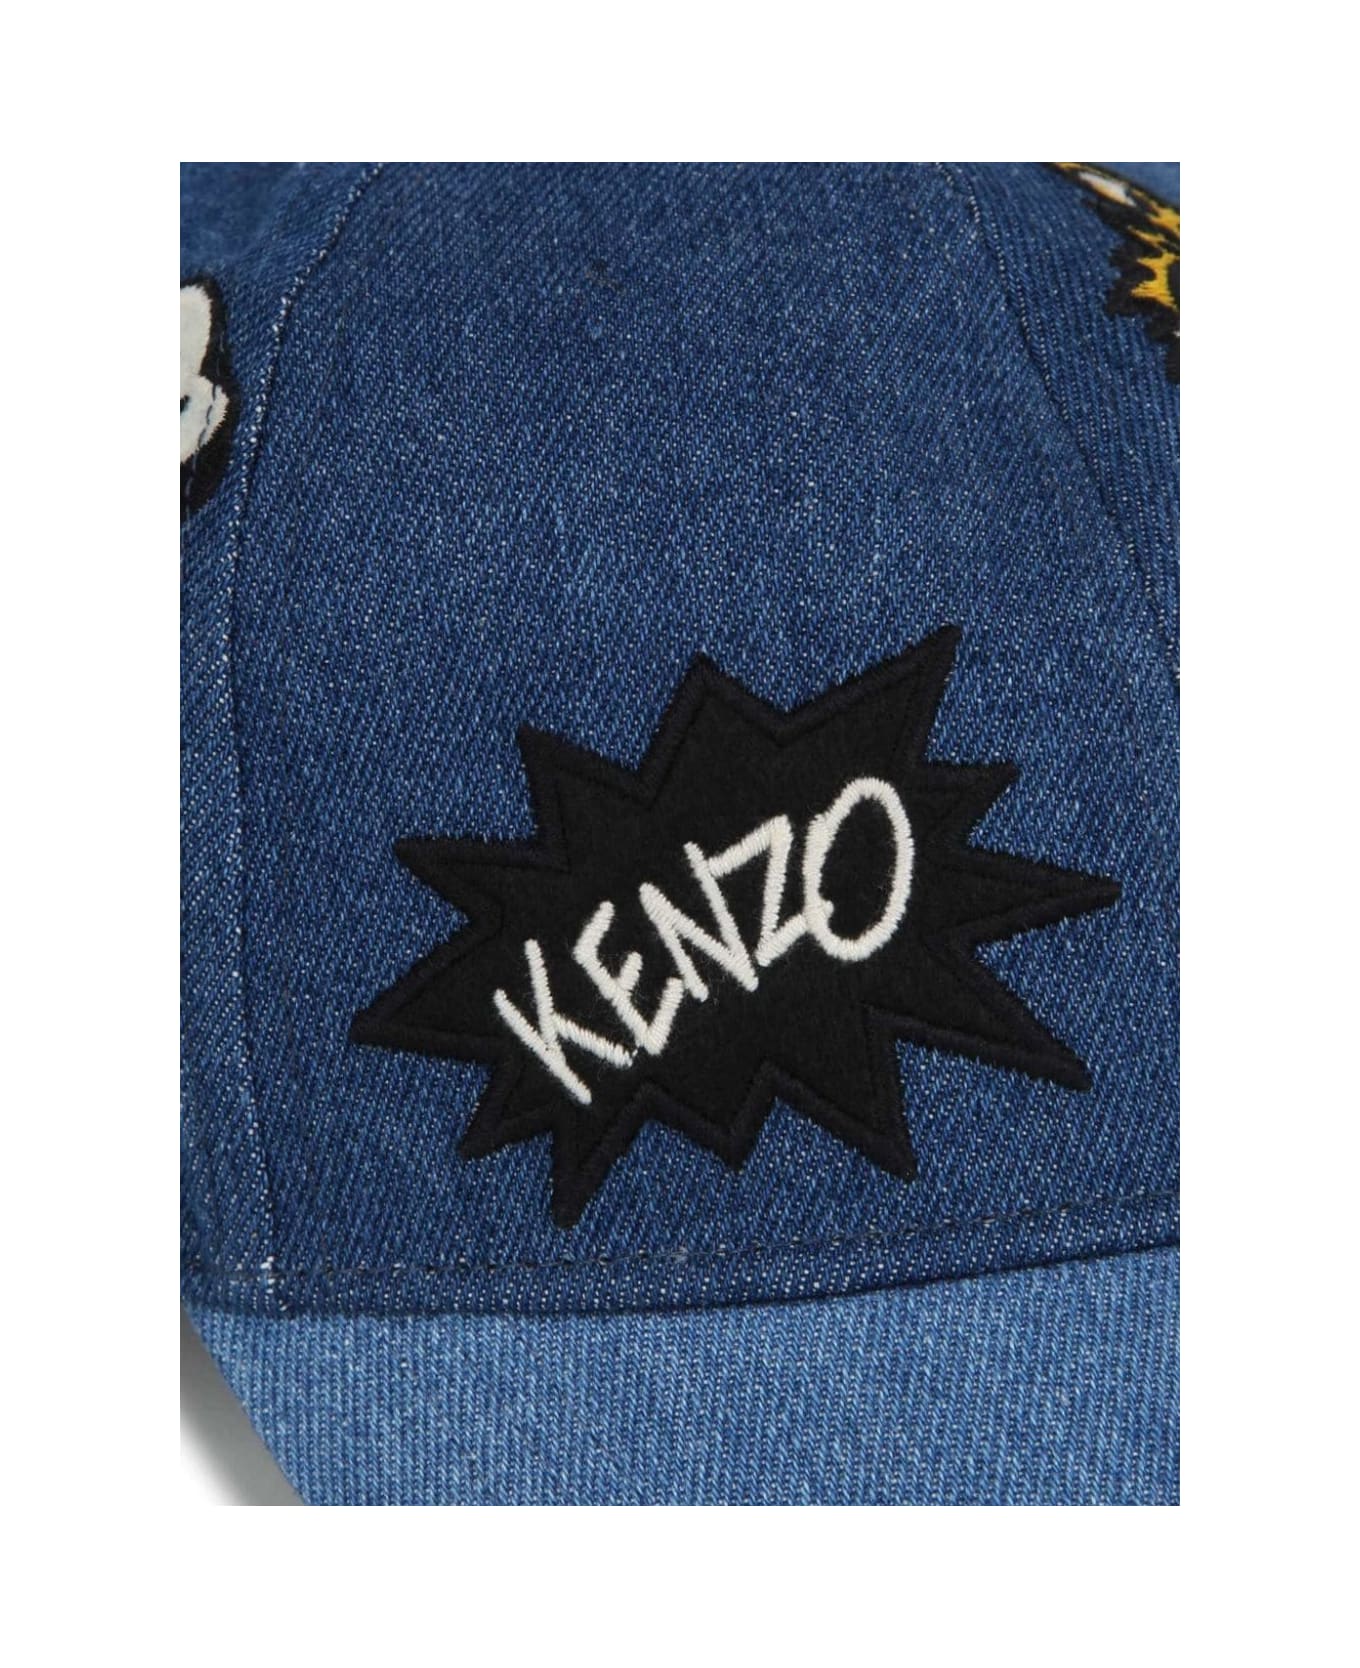 Kenzo Kids Blue Baseball Hat With Patch In Cotton Boy - Grey アクセサリー＆ギフト